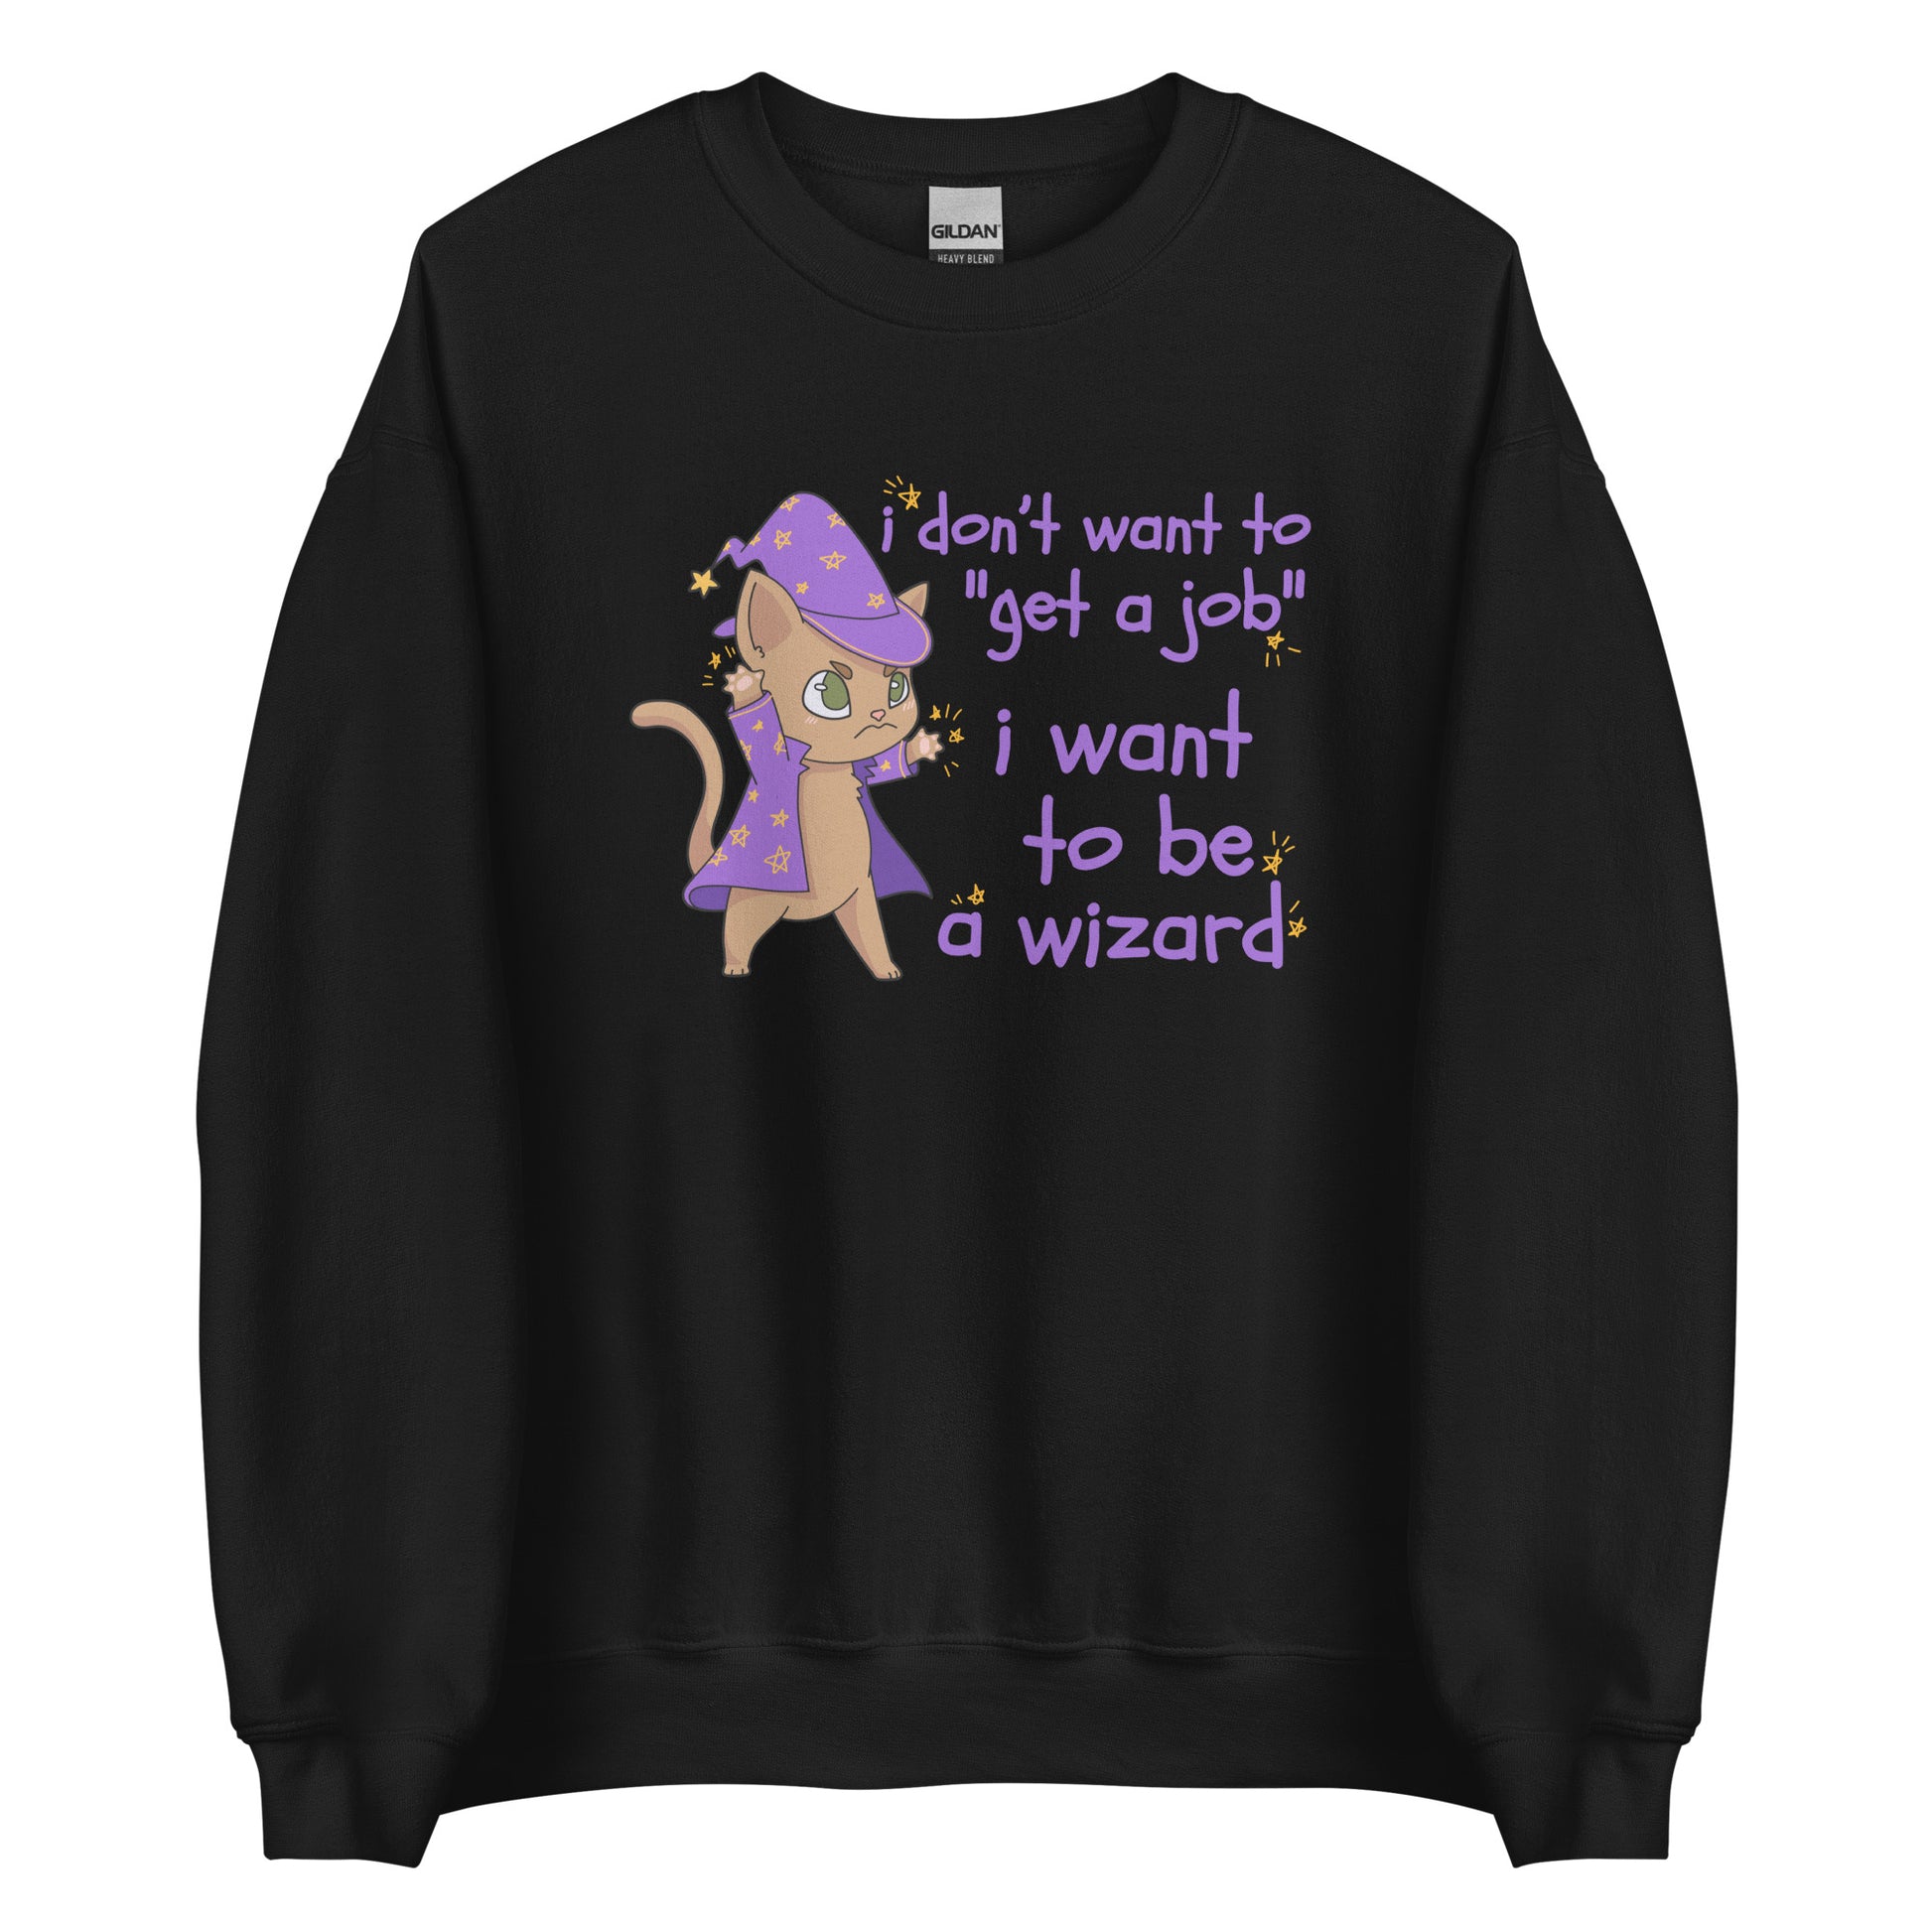 A black crewneck sweatshirt featuring an illustration of a small cat wearing wizard robes and a hat. Text alongside the cat reads "i don't want to "get a job". i want to be a wizard."